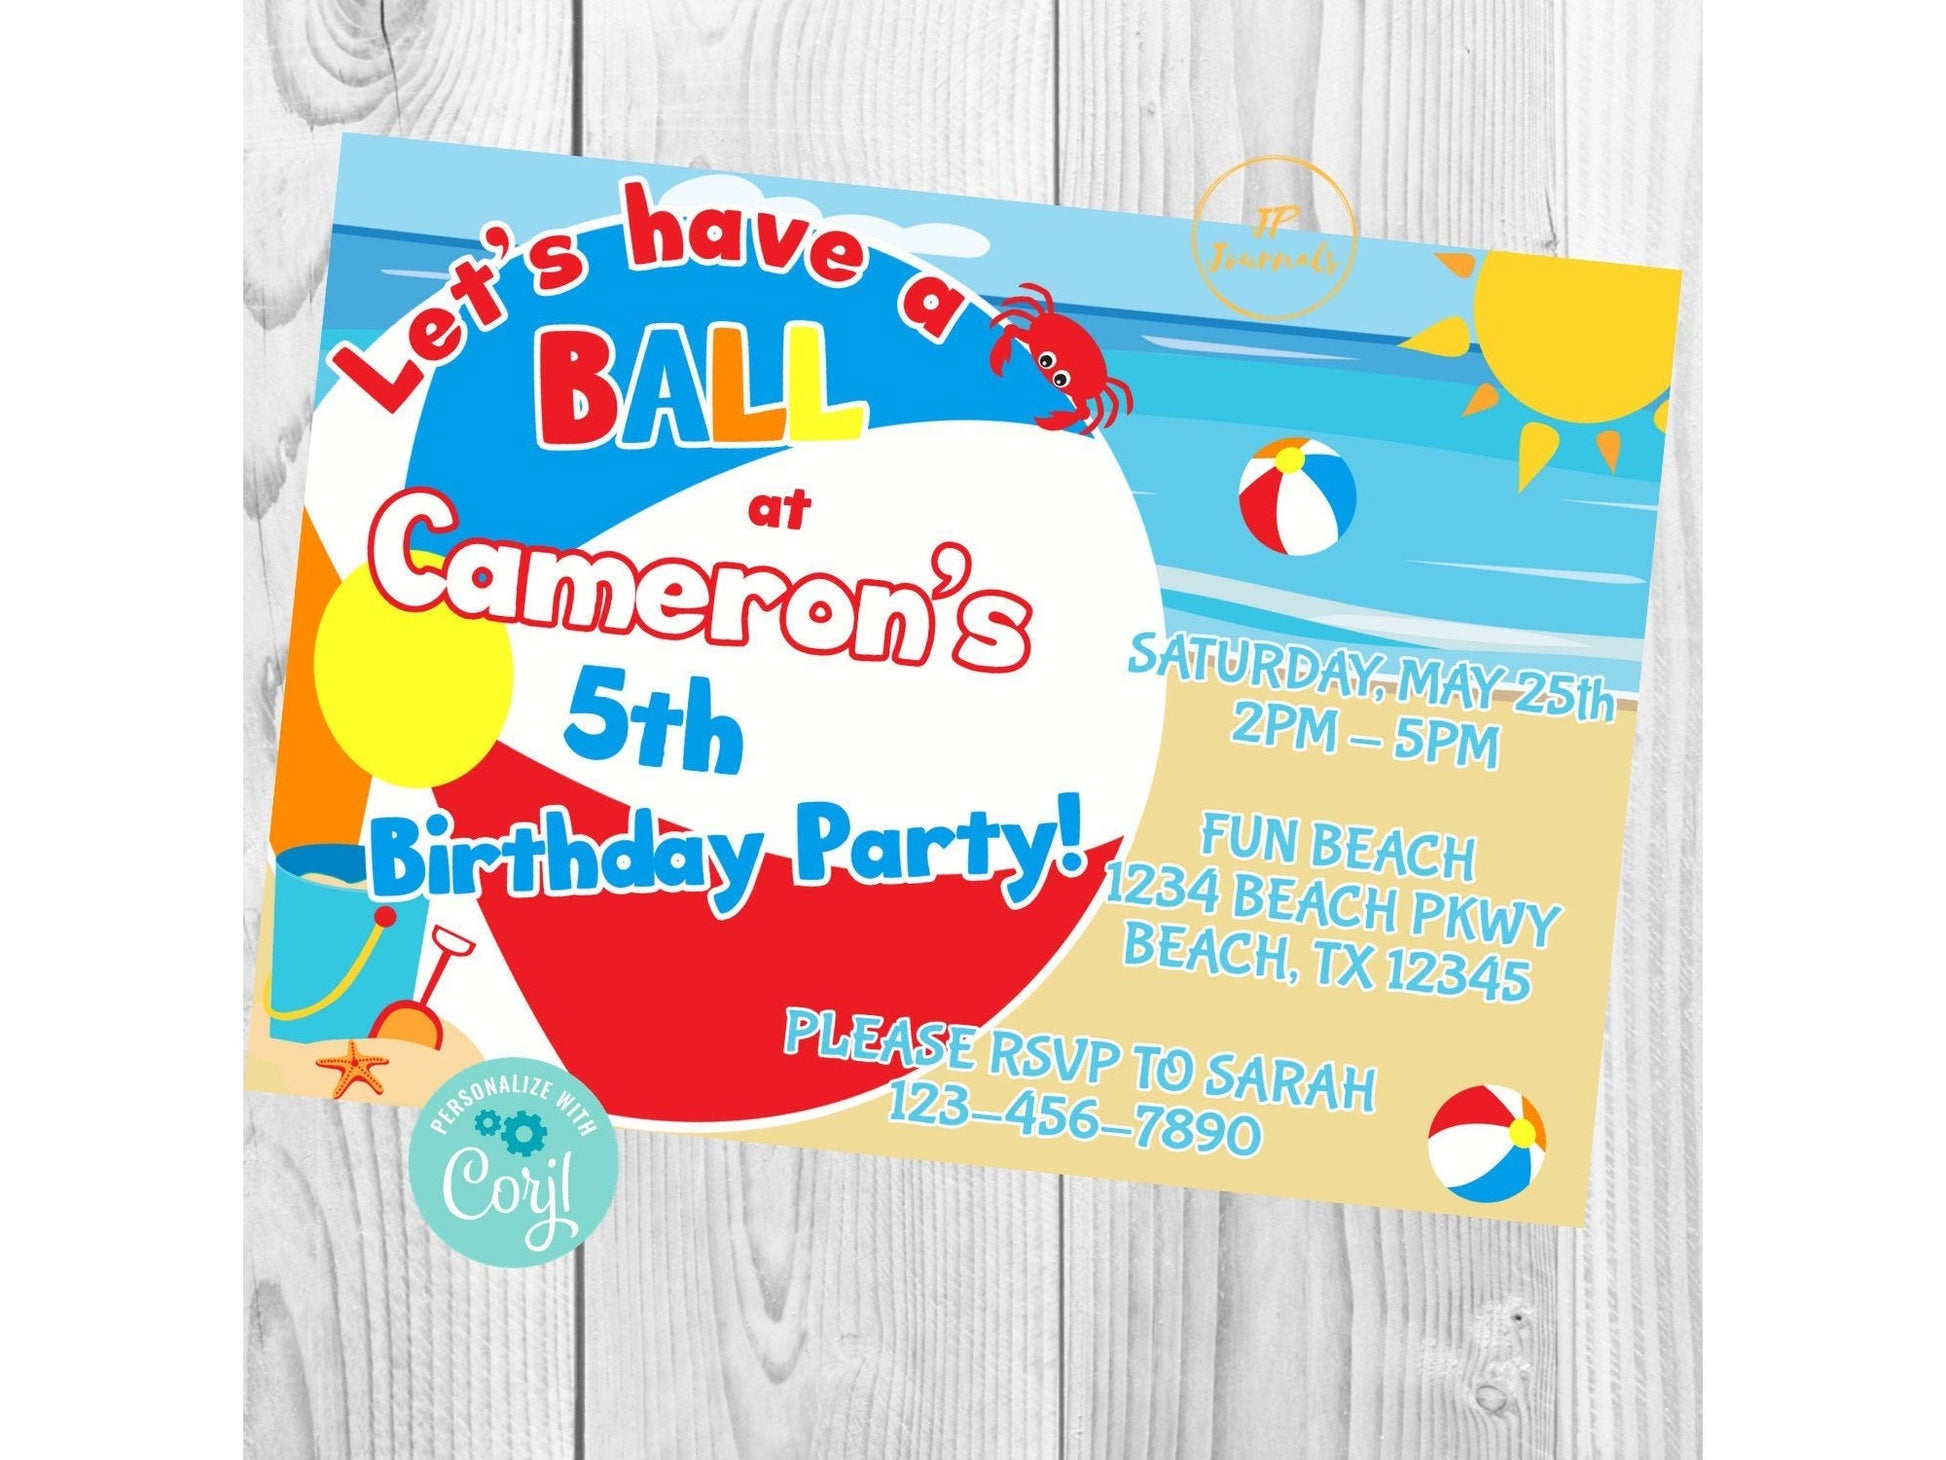 Beach Ball - Let's Have a Ball Birthday Party Invitation